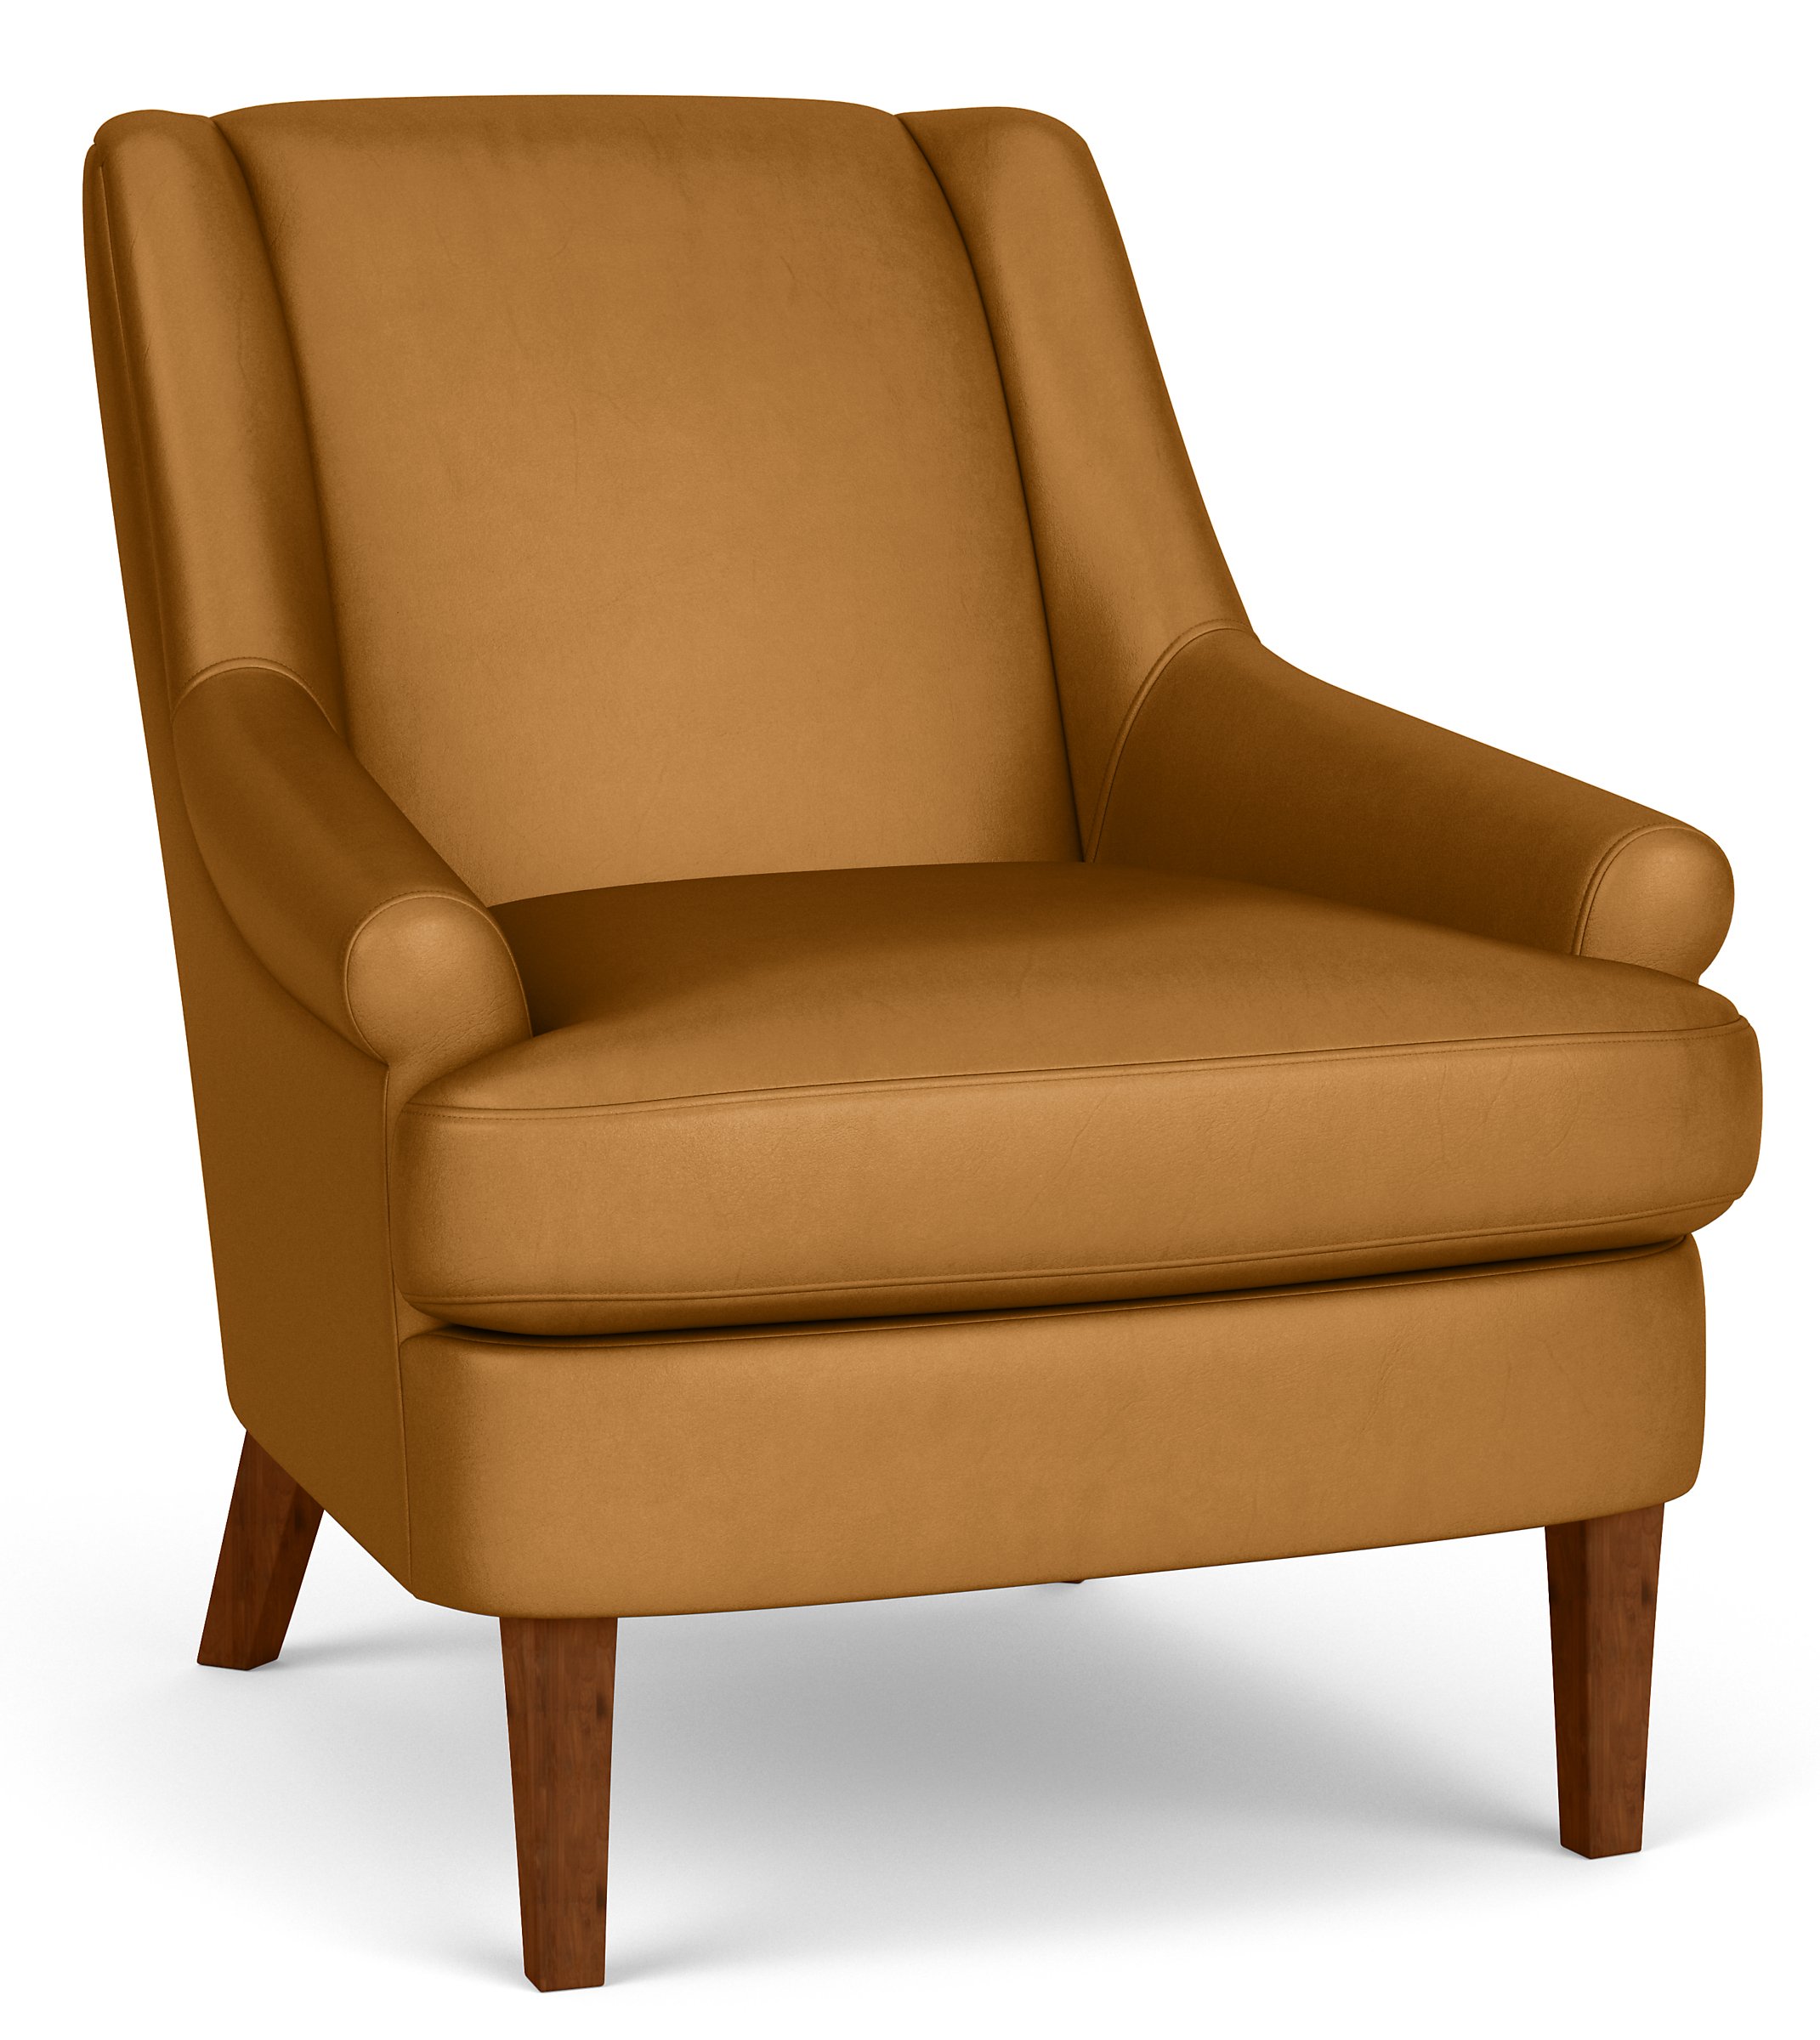 Louise Chair in Vento Camel Leather with Mocha Legs